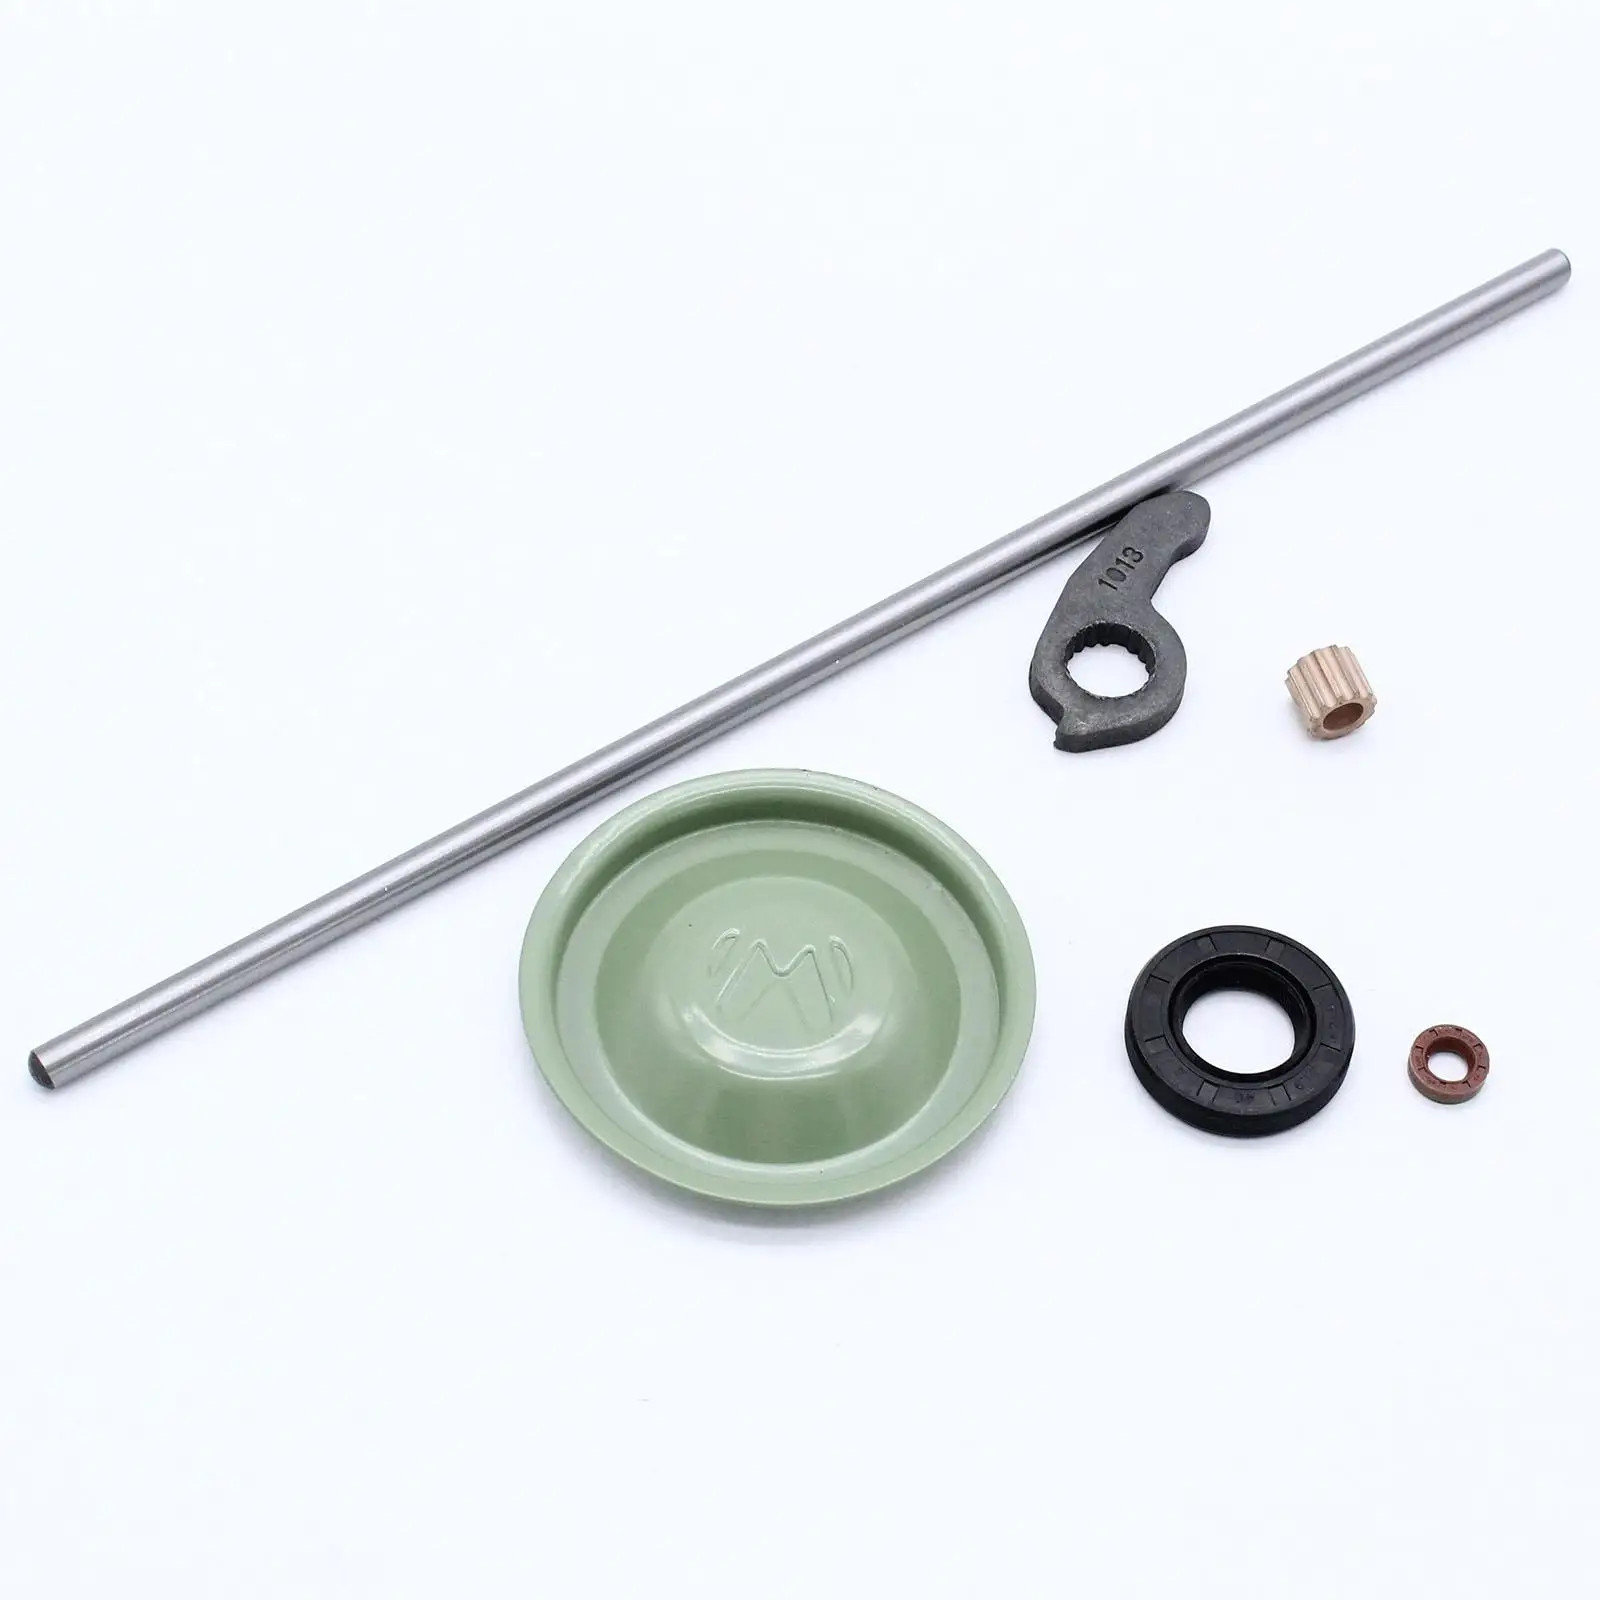 

Clutch Pushrod Lever Kit 020141165EH Clutch Push Rod Lever Green Caps Release Bearing Kits Fits for Golf MK1 MK2 Replaces